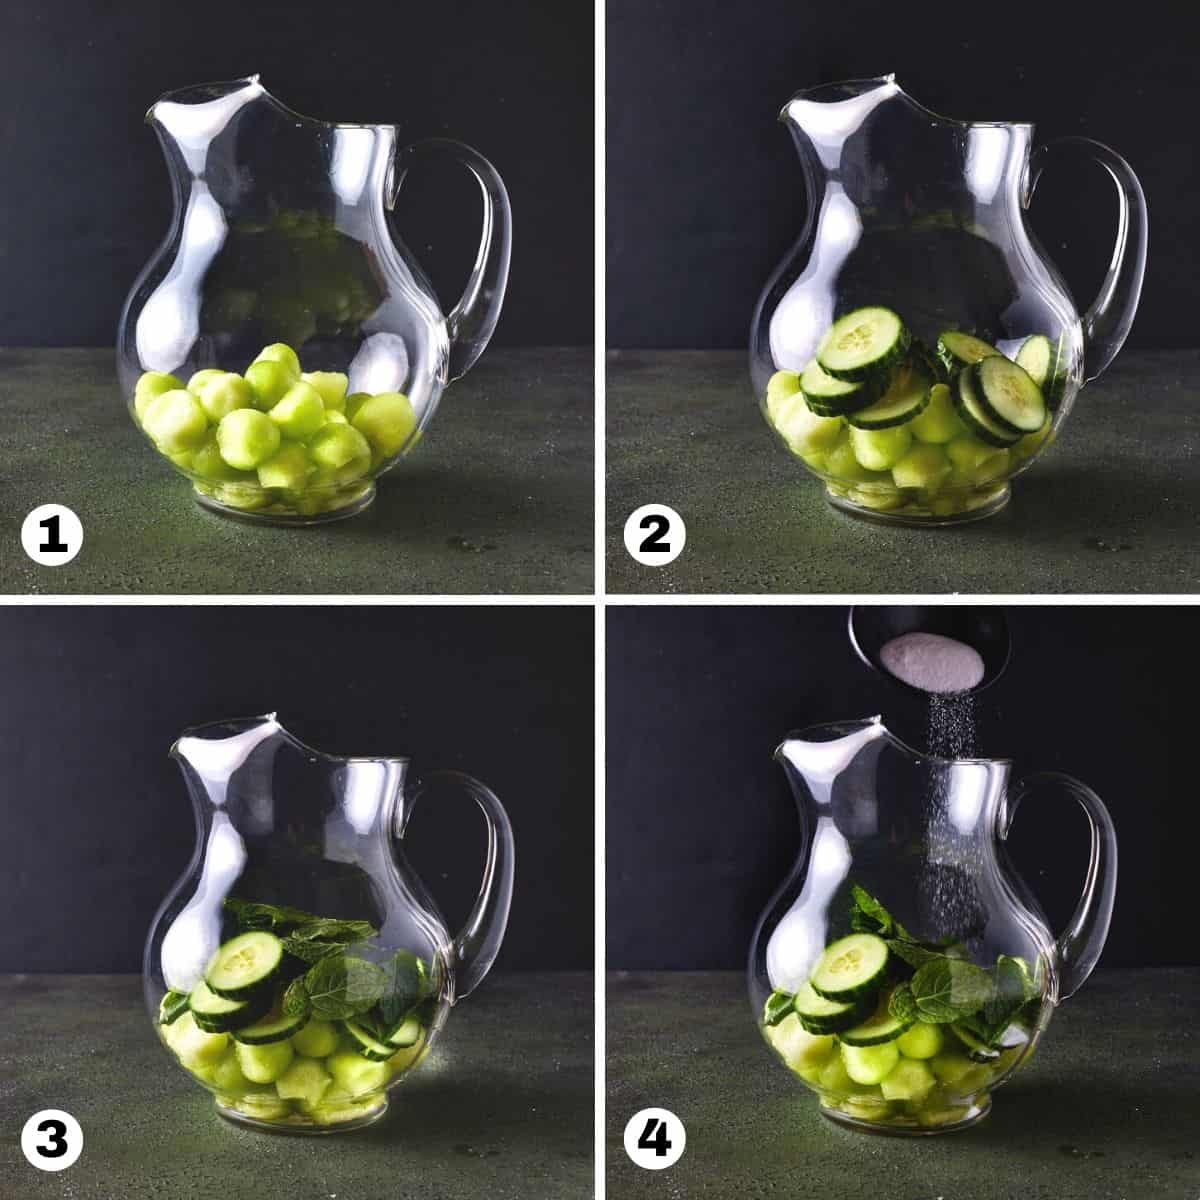 Hand putting melon, cucumber, mint and sugar into glass pitcher. 